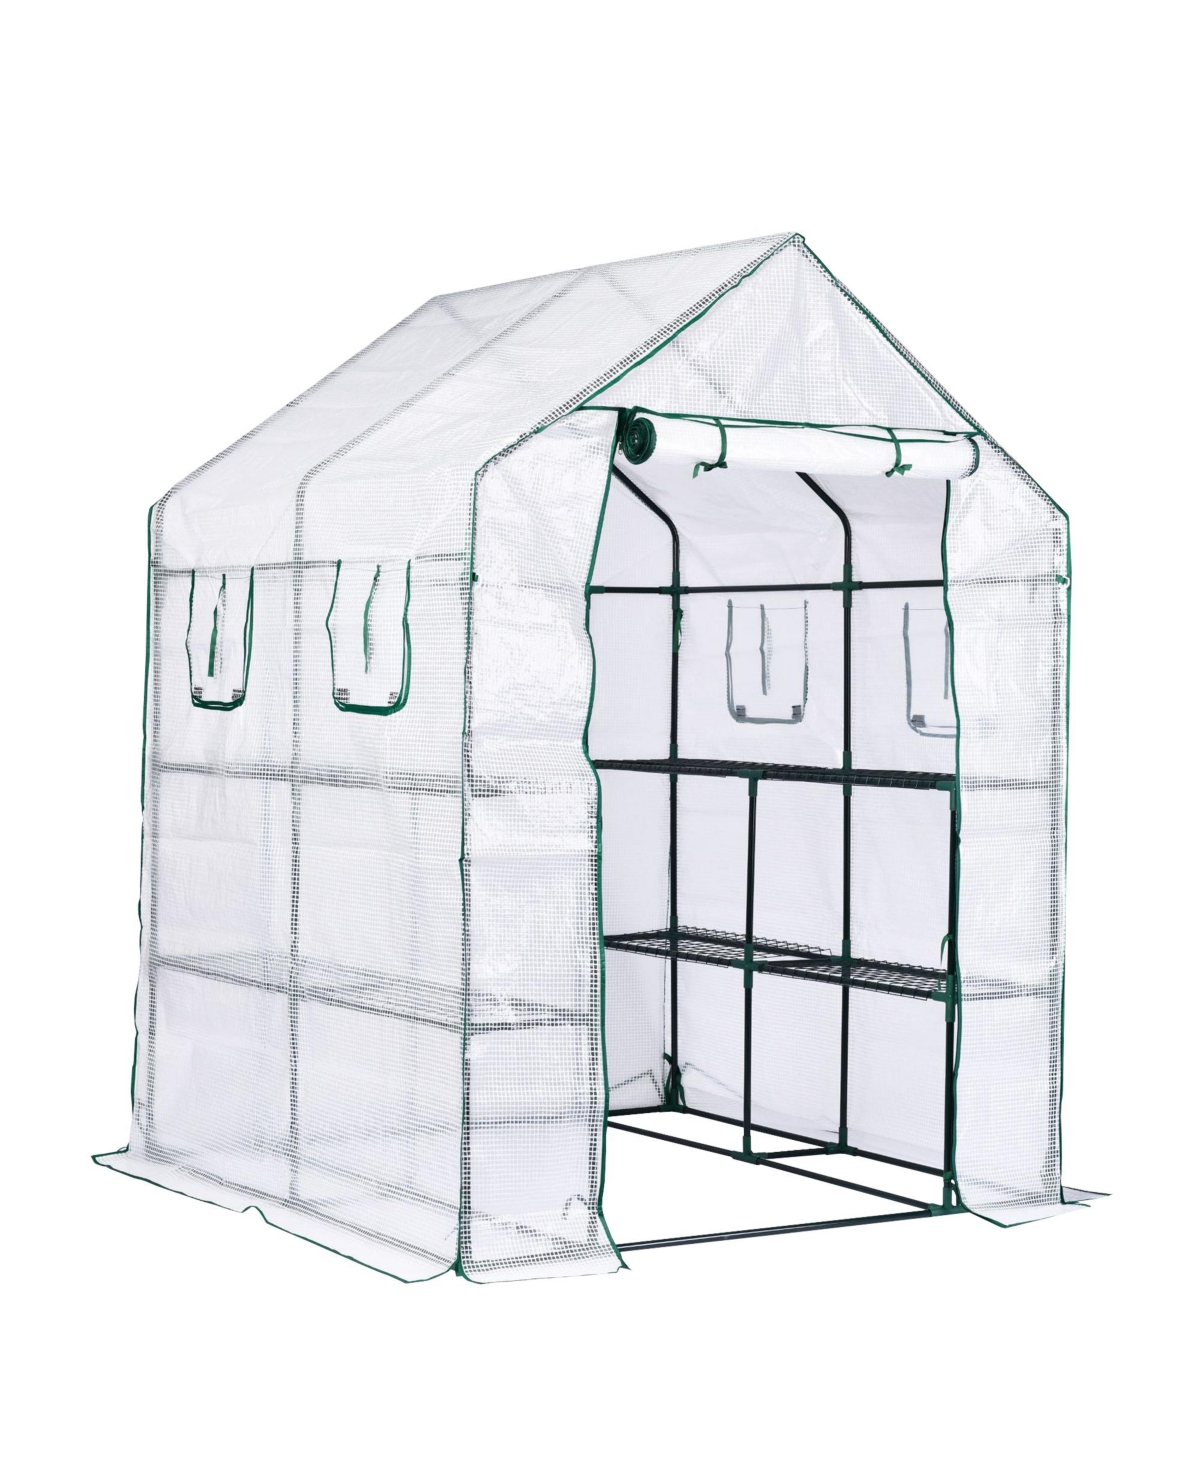 Personal Plastic Indoor Outdoor Standing Greenhouse For Seed Starting and Propagation, Frost Protection Clear, Large, 77 Inches x 56 I